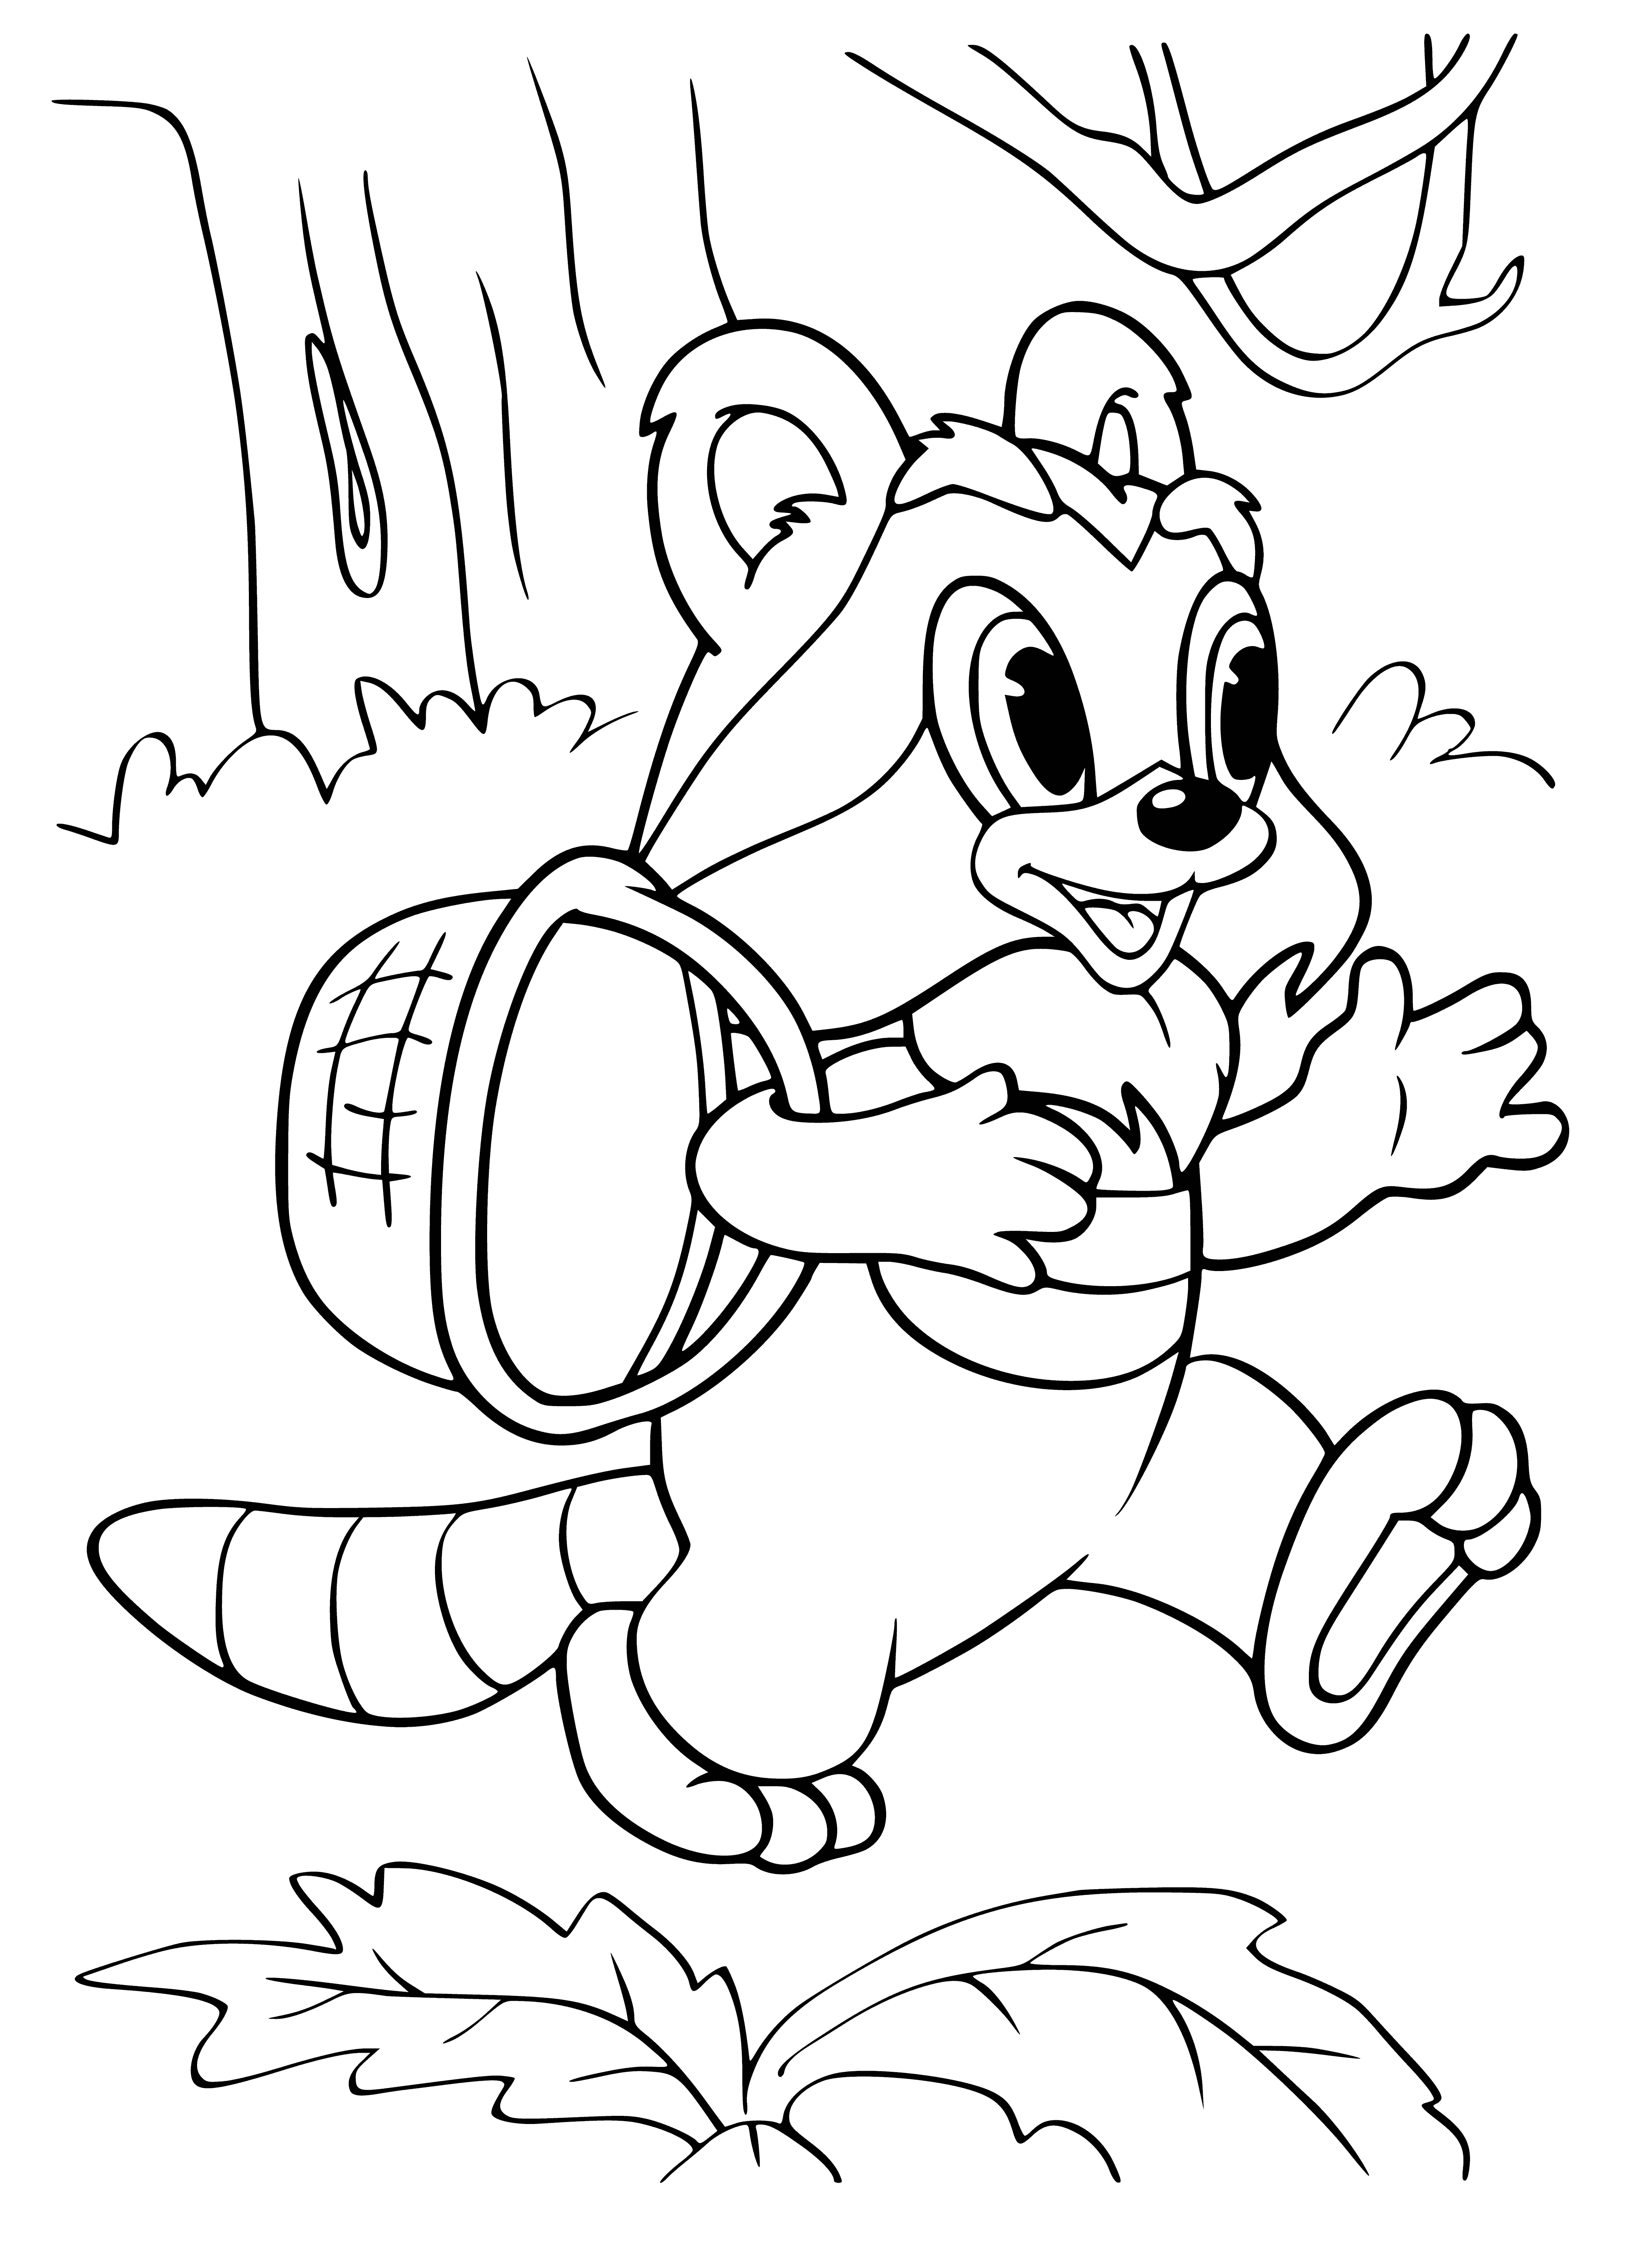 coloring page: A cute raccoon stands on hind legs, with front paws in the air & a long bushy tail, wearing a black mask around its eyes. Looking up at something mysterious! #CutenessOverload